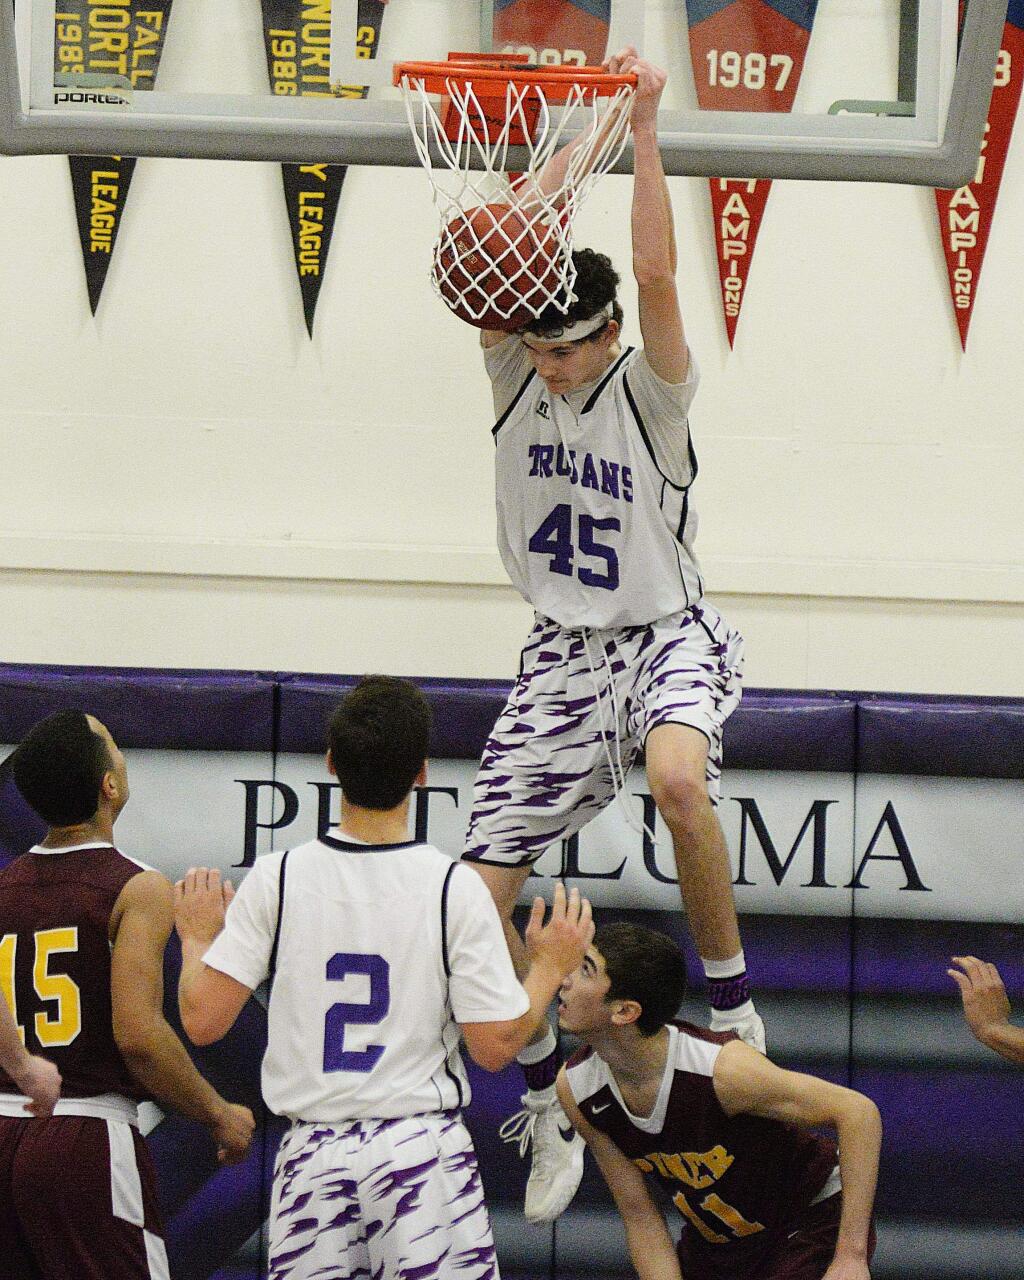 SUMNER FOWLER/FOR THE ARGUS-COURIERPetaluma's Joey Potts slams down two points in the Trojans' 57-41 victory.